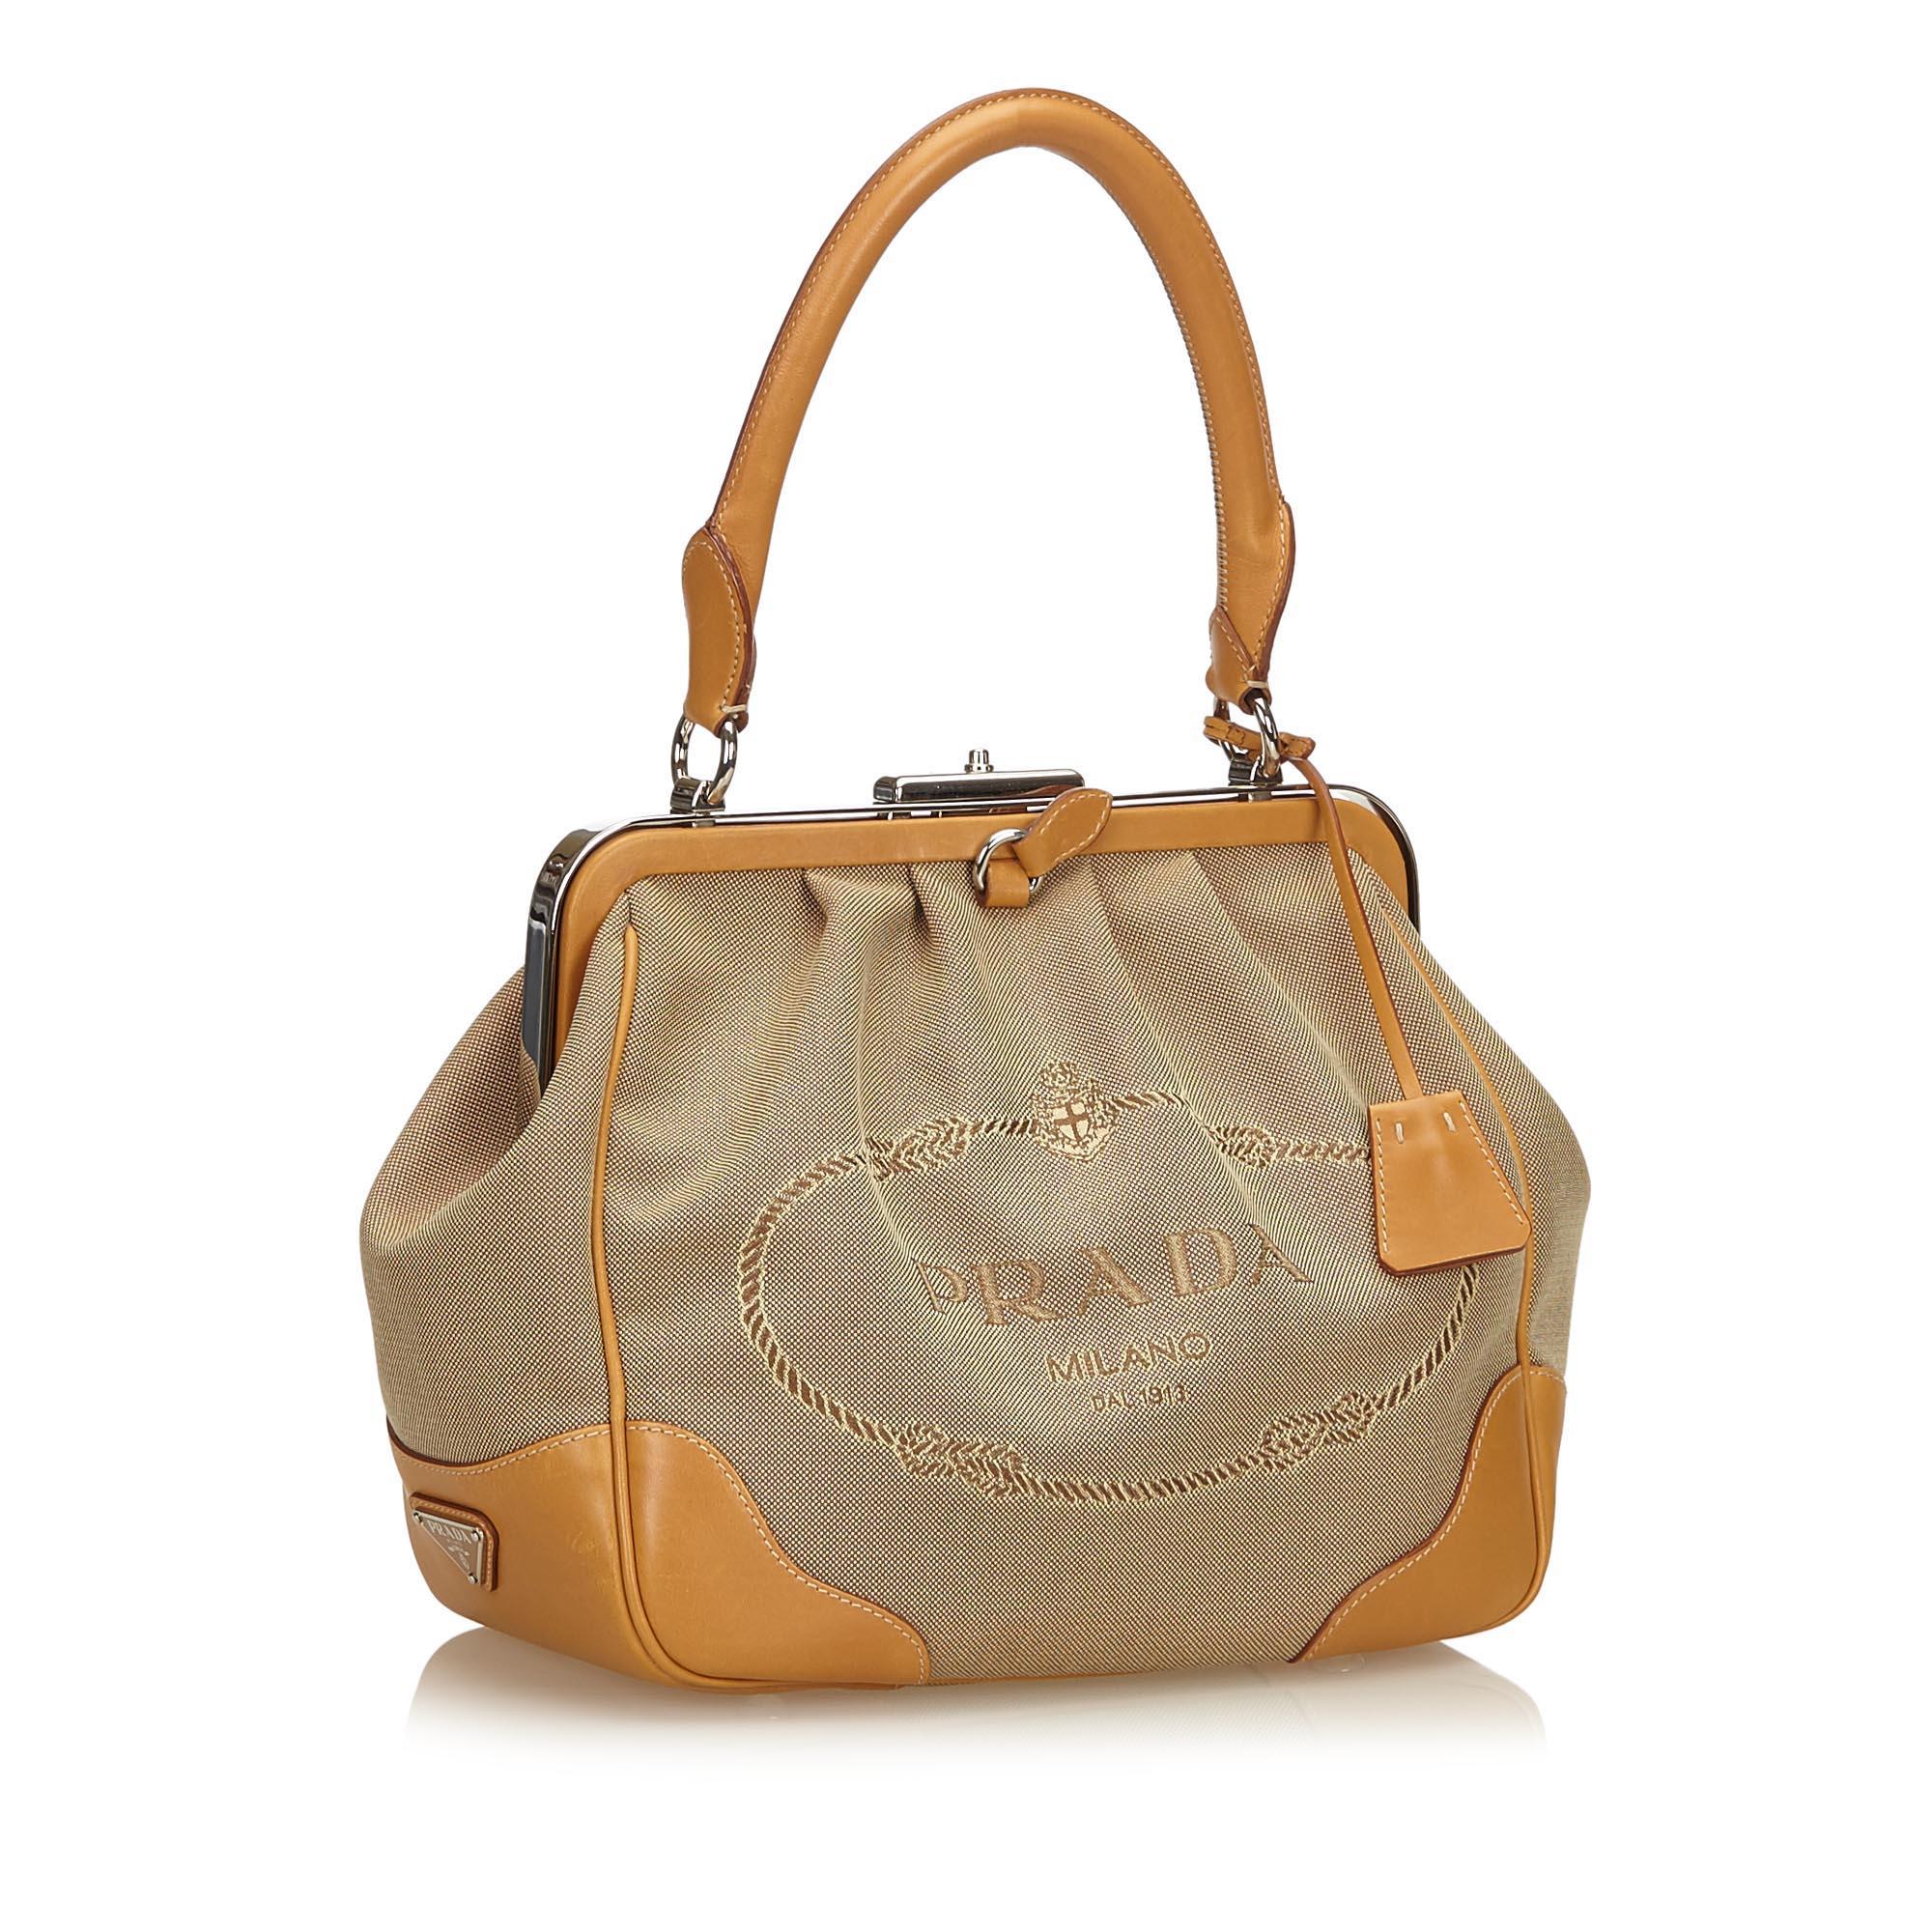 This shoulder bag features a jacquard body, rolled leather handle, push lock closure, and an interior zip pocket.

It carries a A condition rating.

Dimensions: 
Length 23.00 cm
Width 25.00 cm
Depth 14.00 cm
Shoulder Drop 17.00 cm

Inclusions: